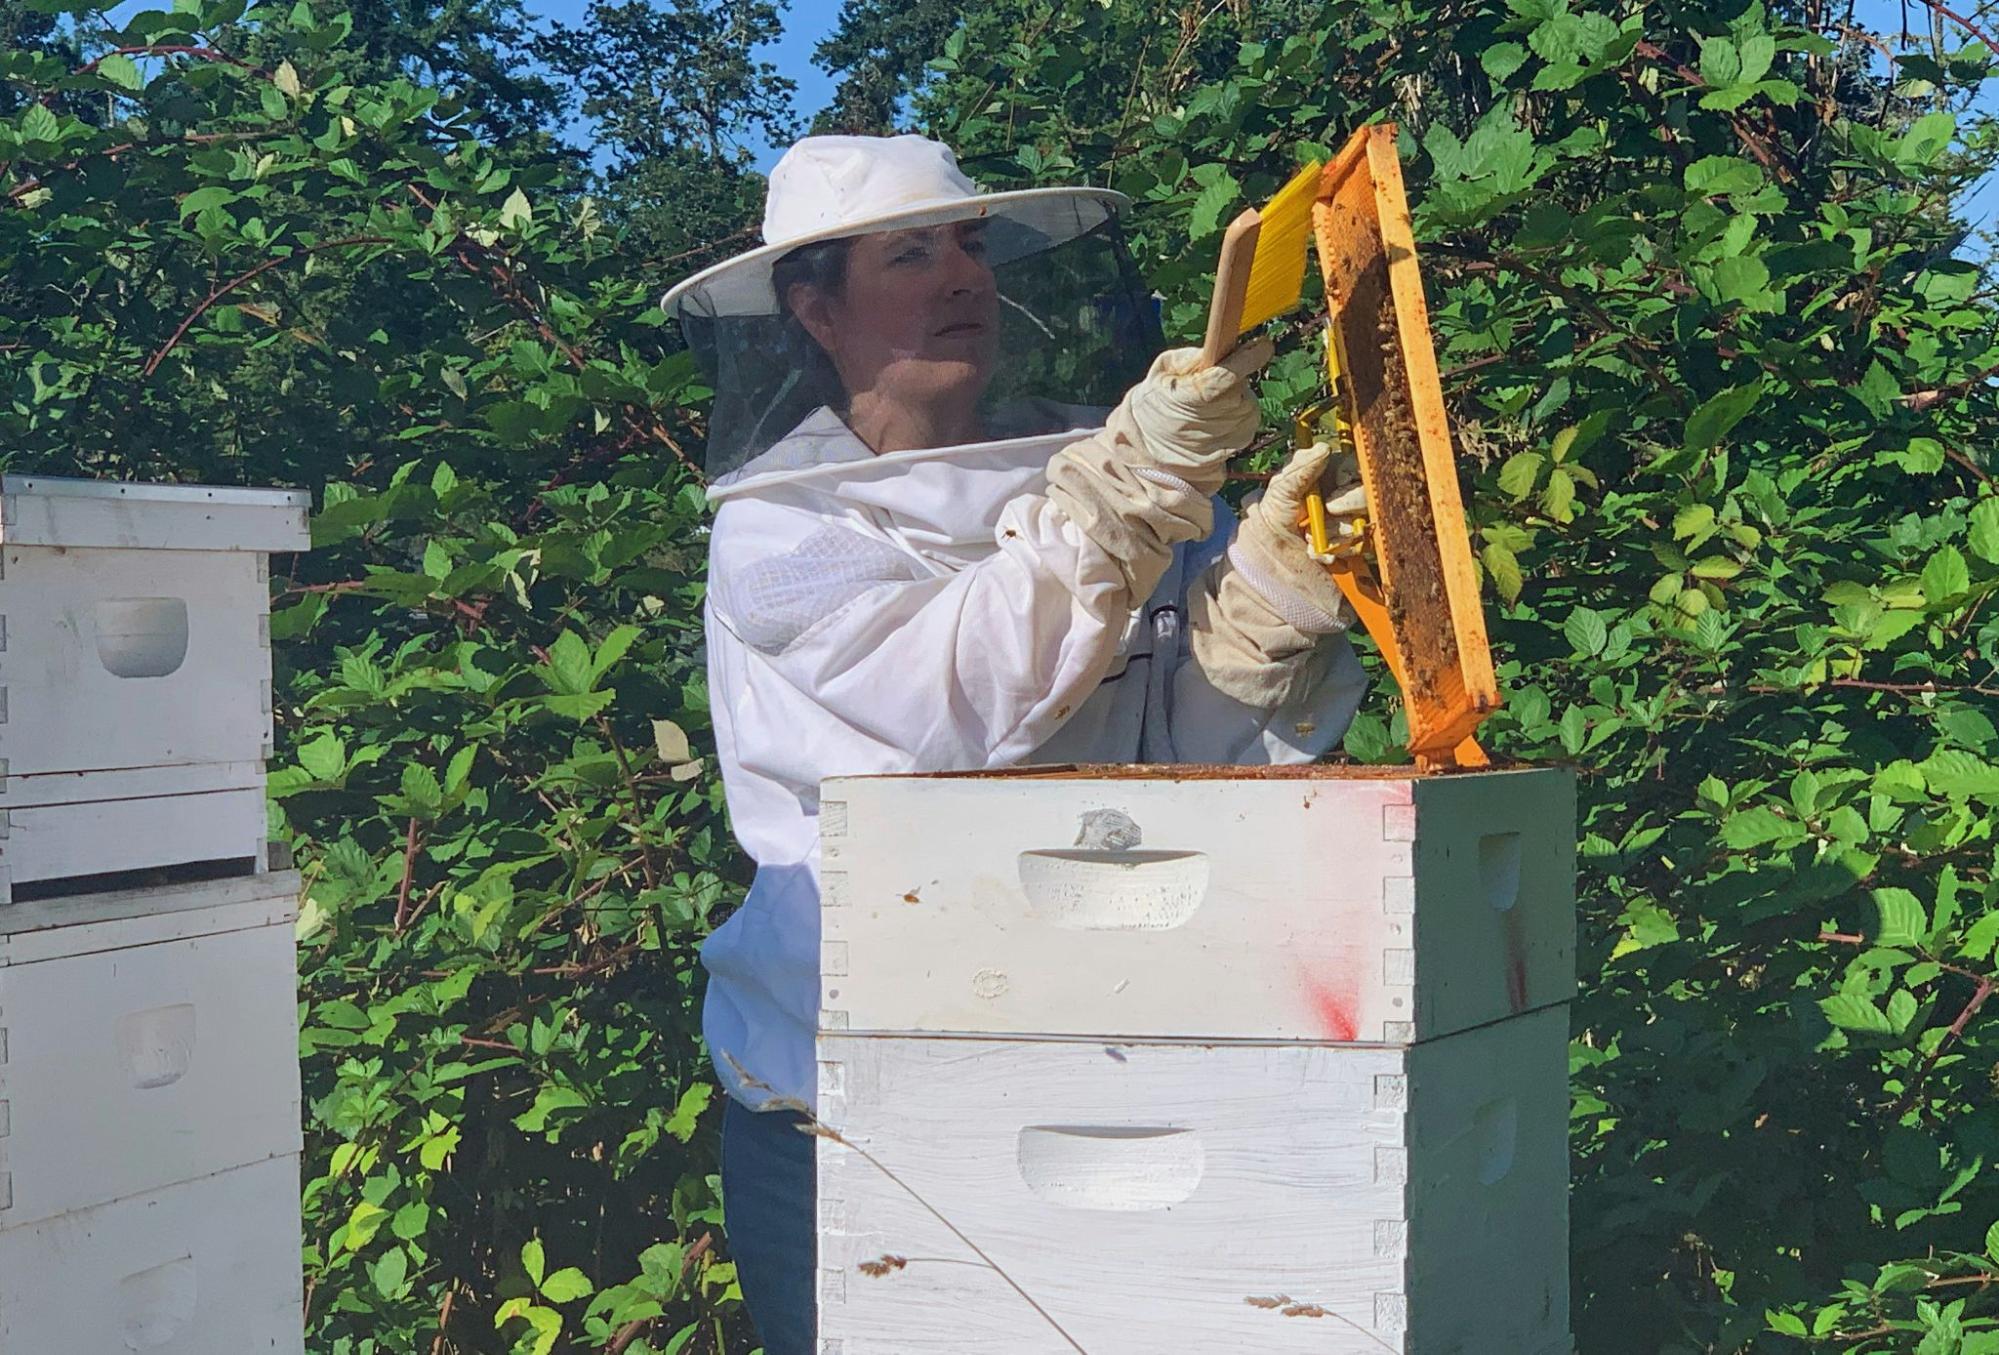 Beekeeper inspecting honeycomb frame near beehives in sunny green foliage setting